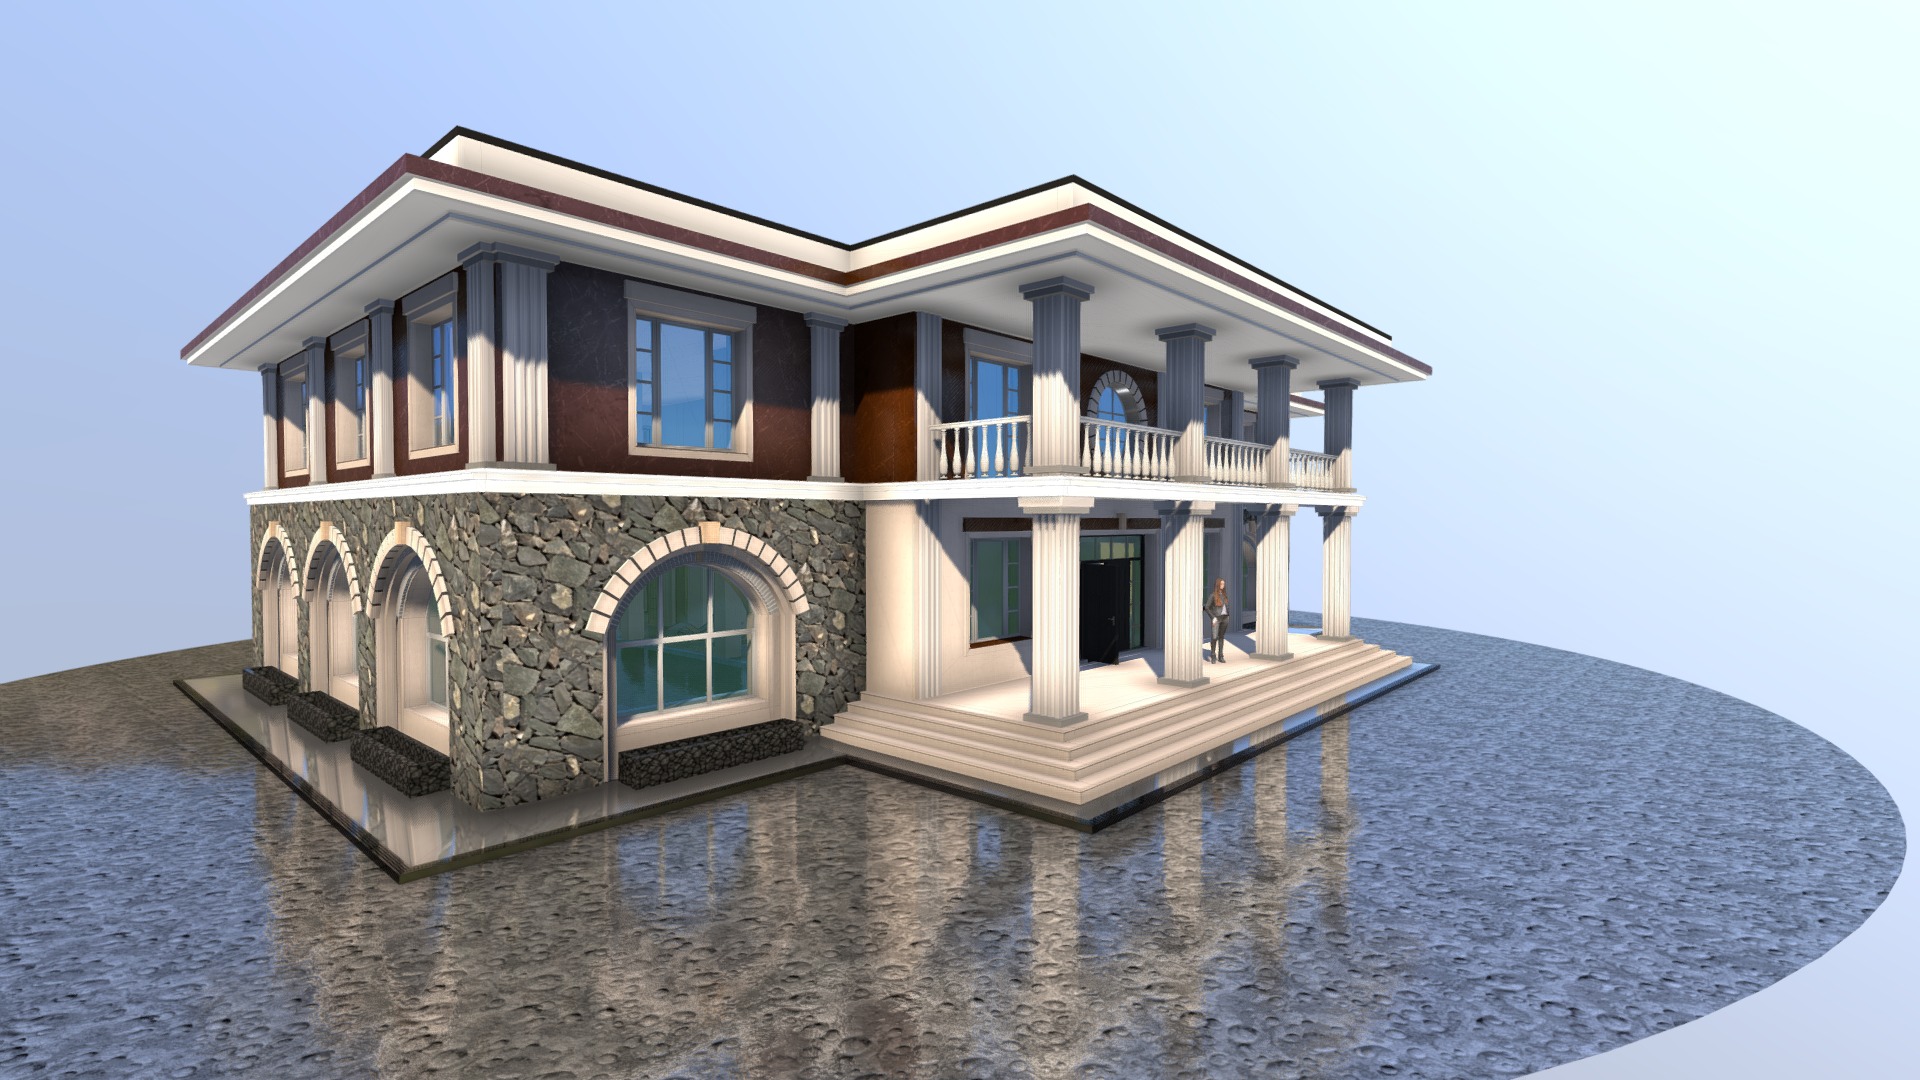 3D model Interior / exterior… Soon…daily changes - This is a 3D model of the Interior / exterior... Soon...daily changes. The 3D model is about a house on a dock.